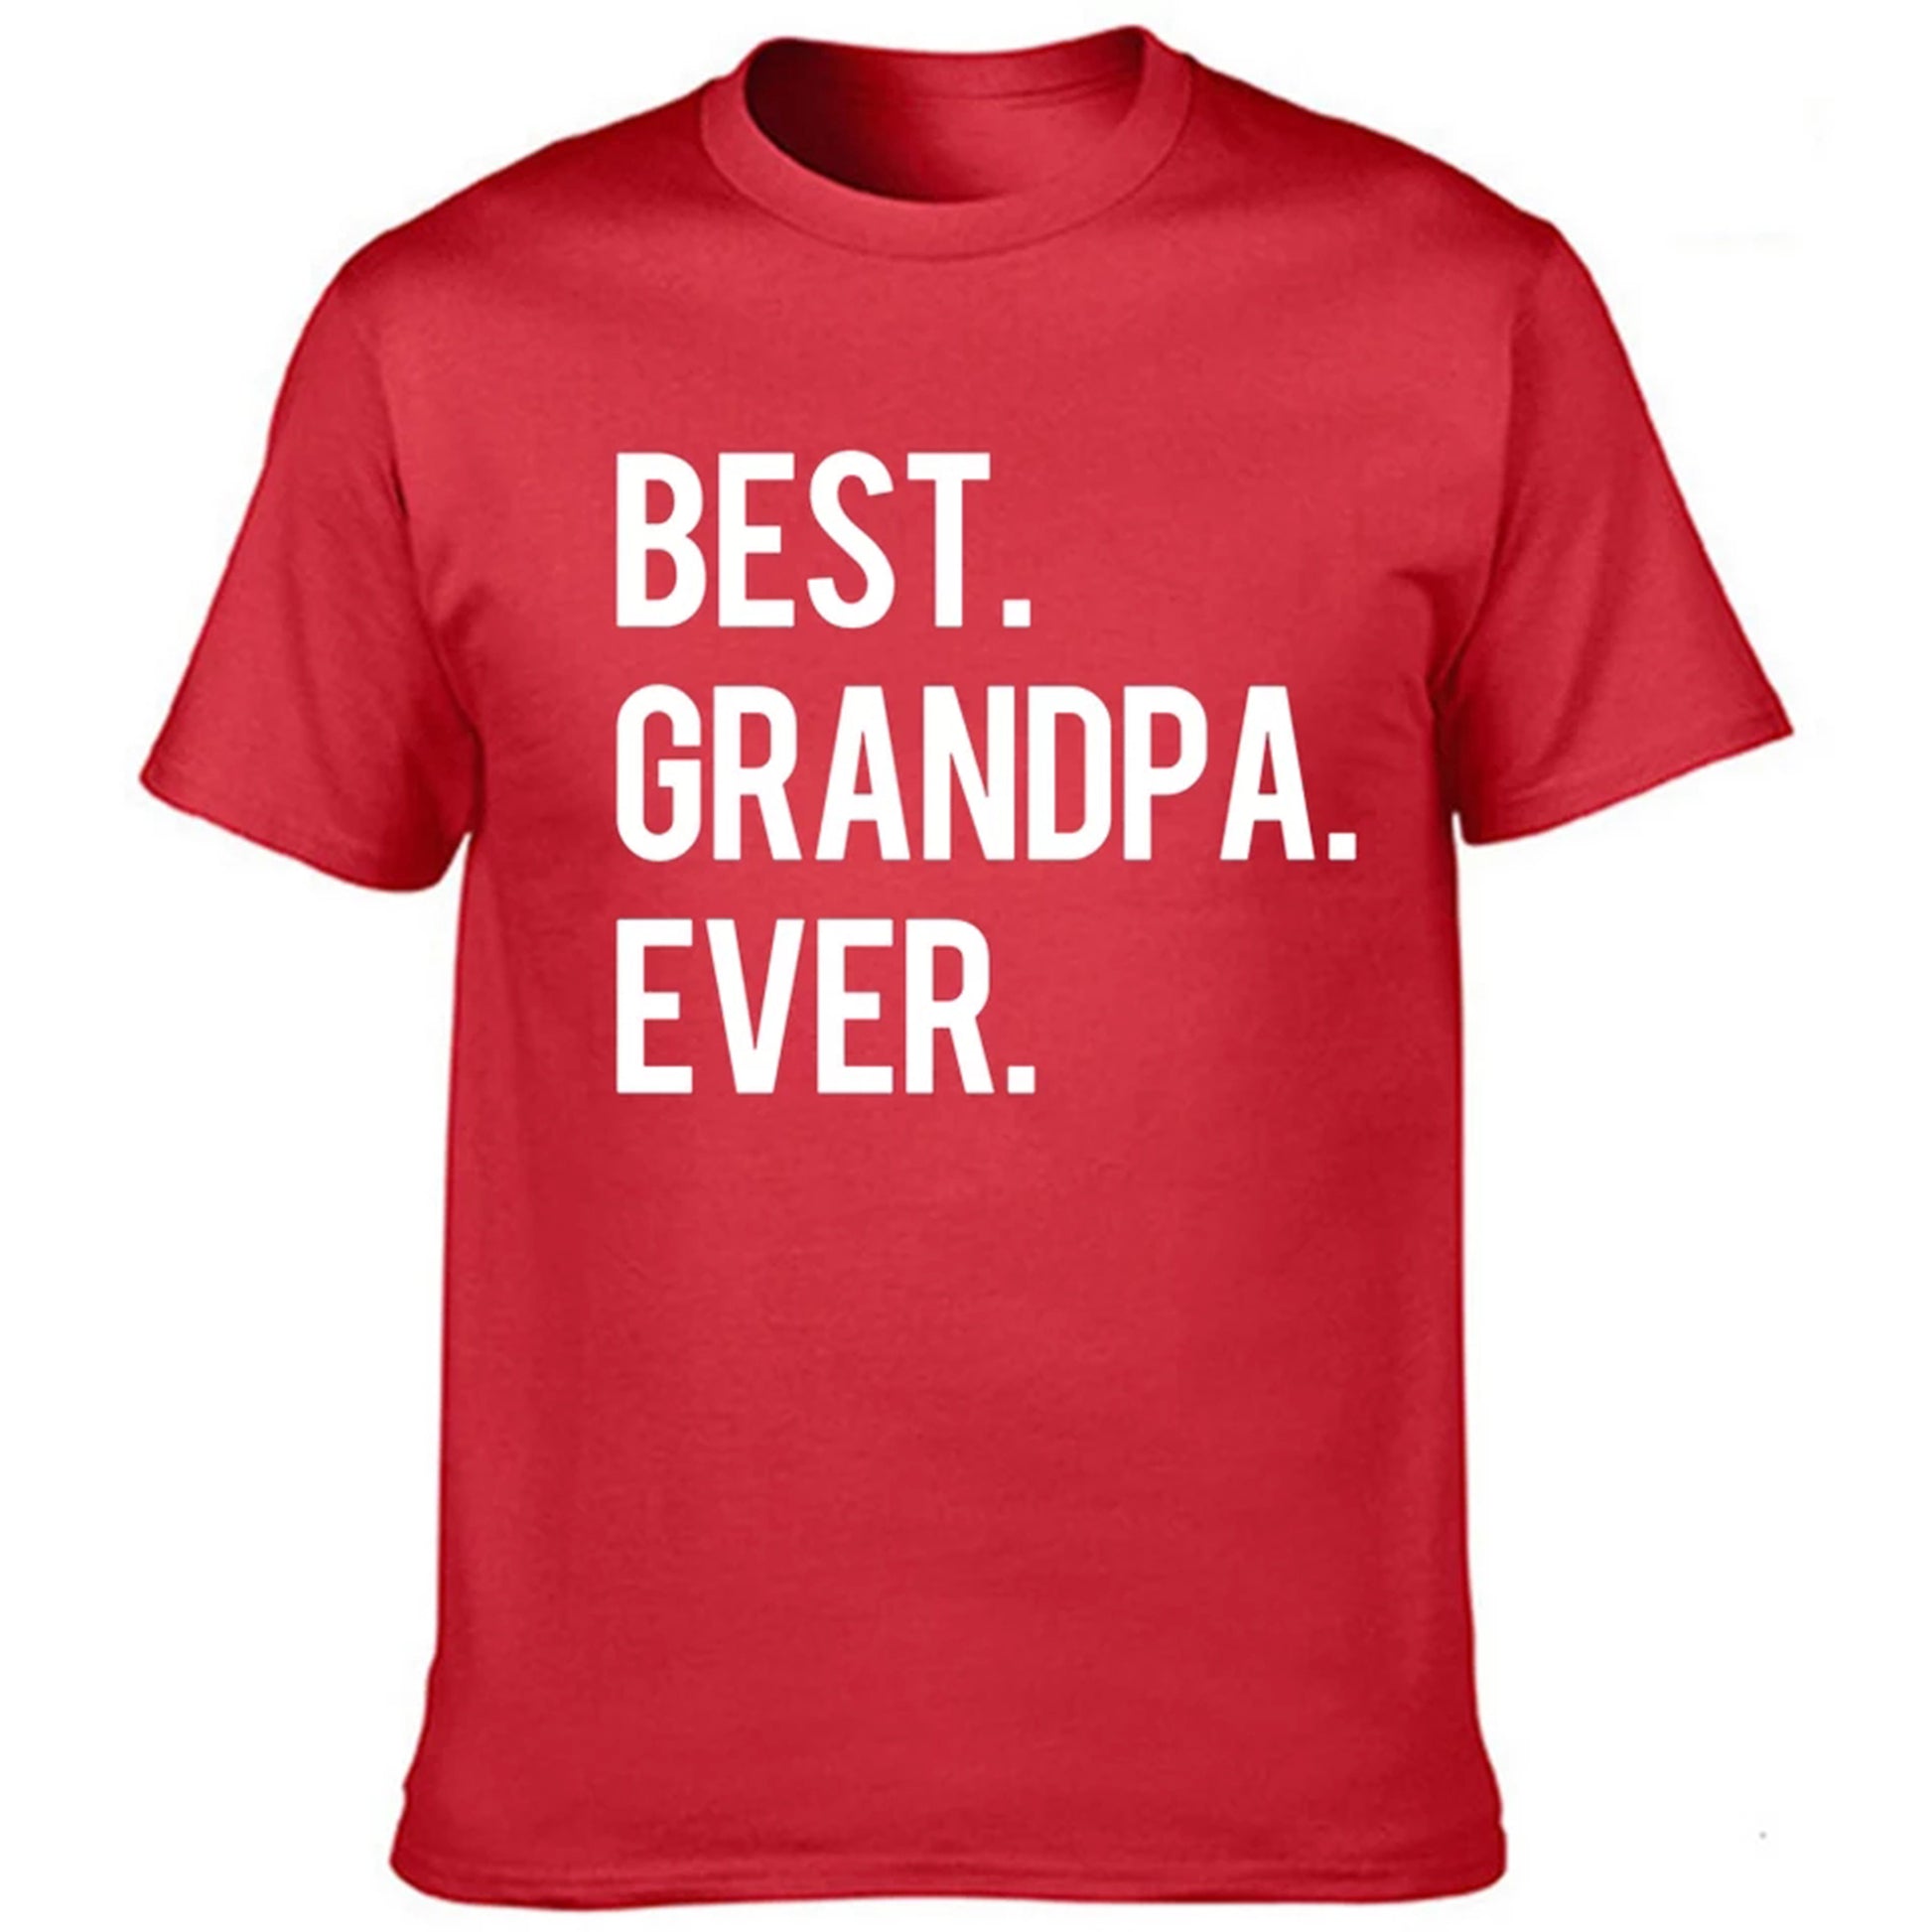 Best Grandfather t shirts for men- Red